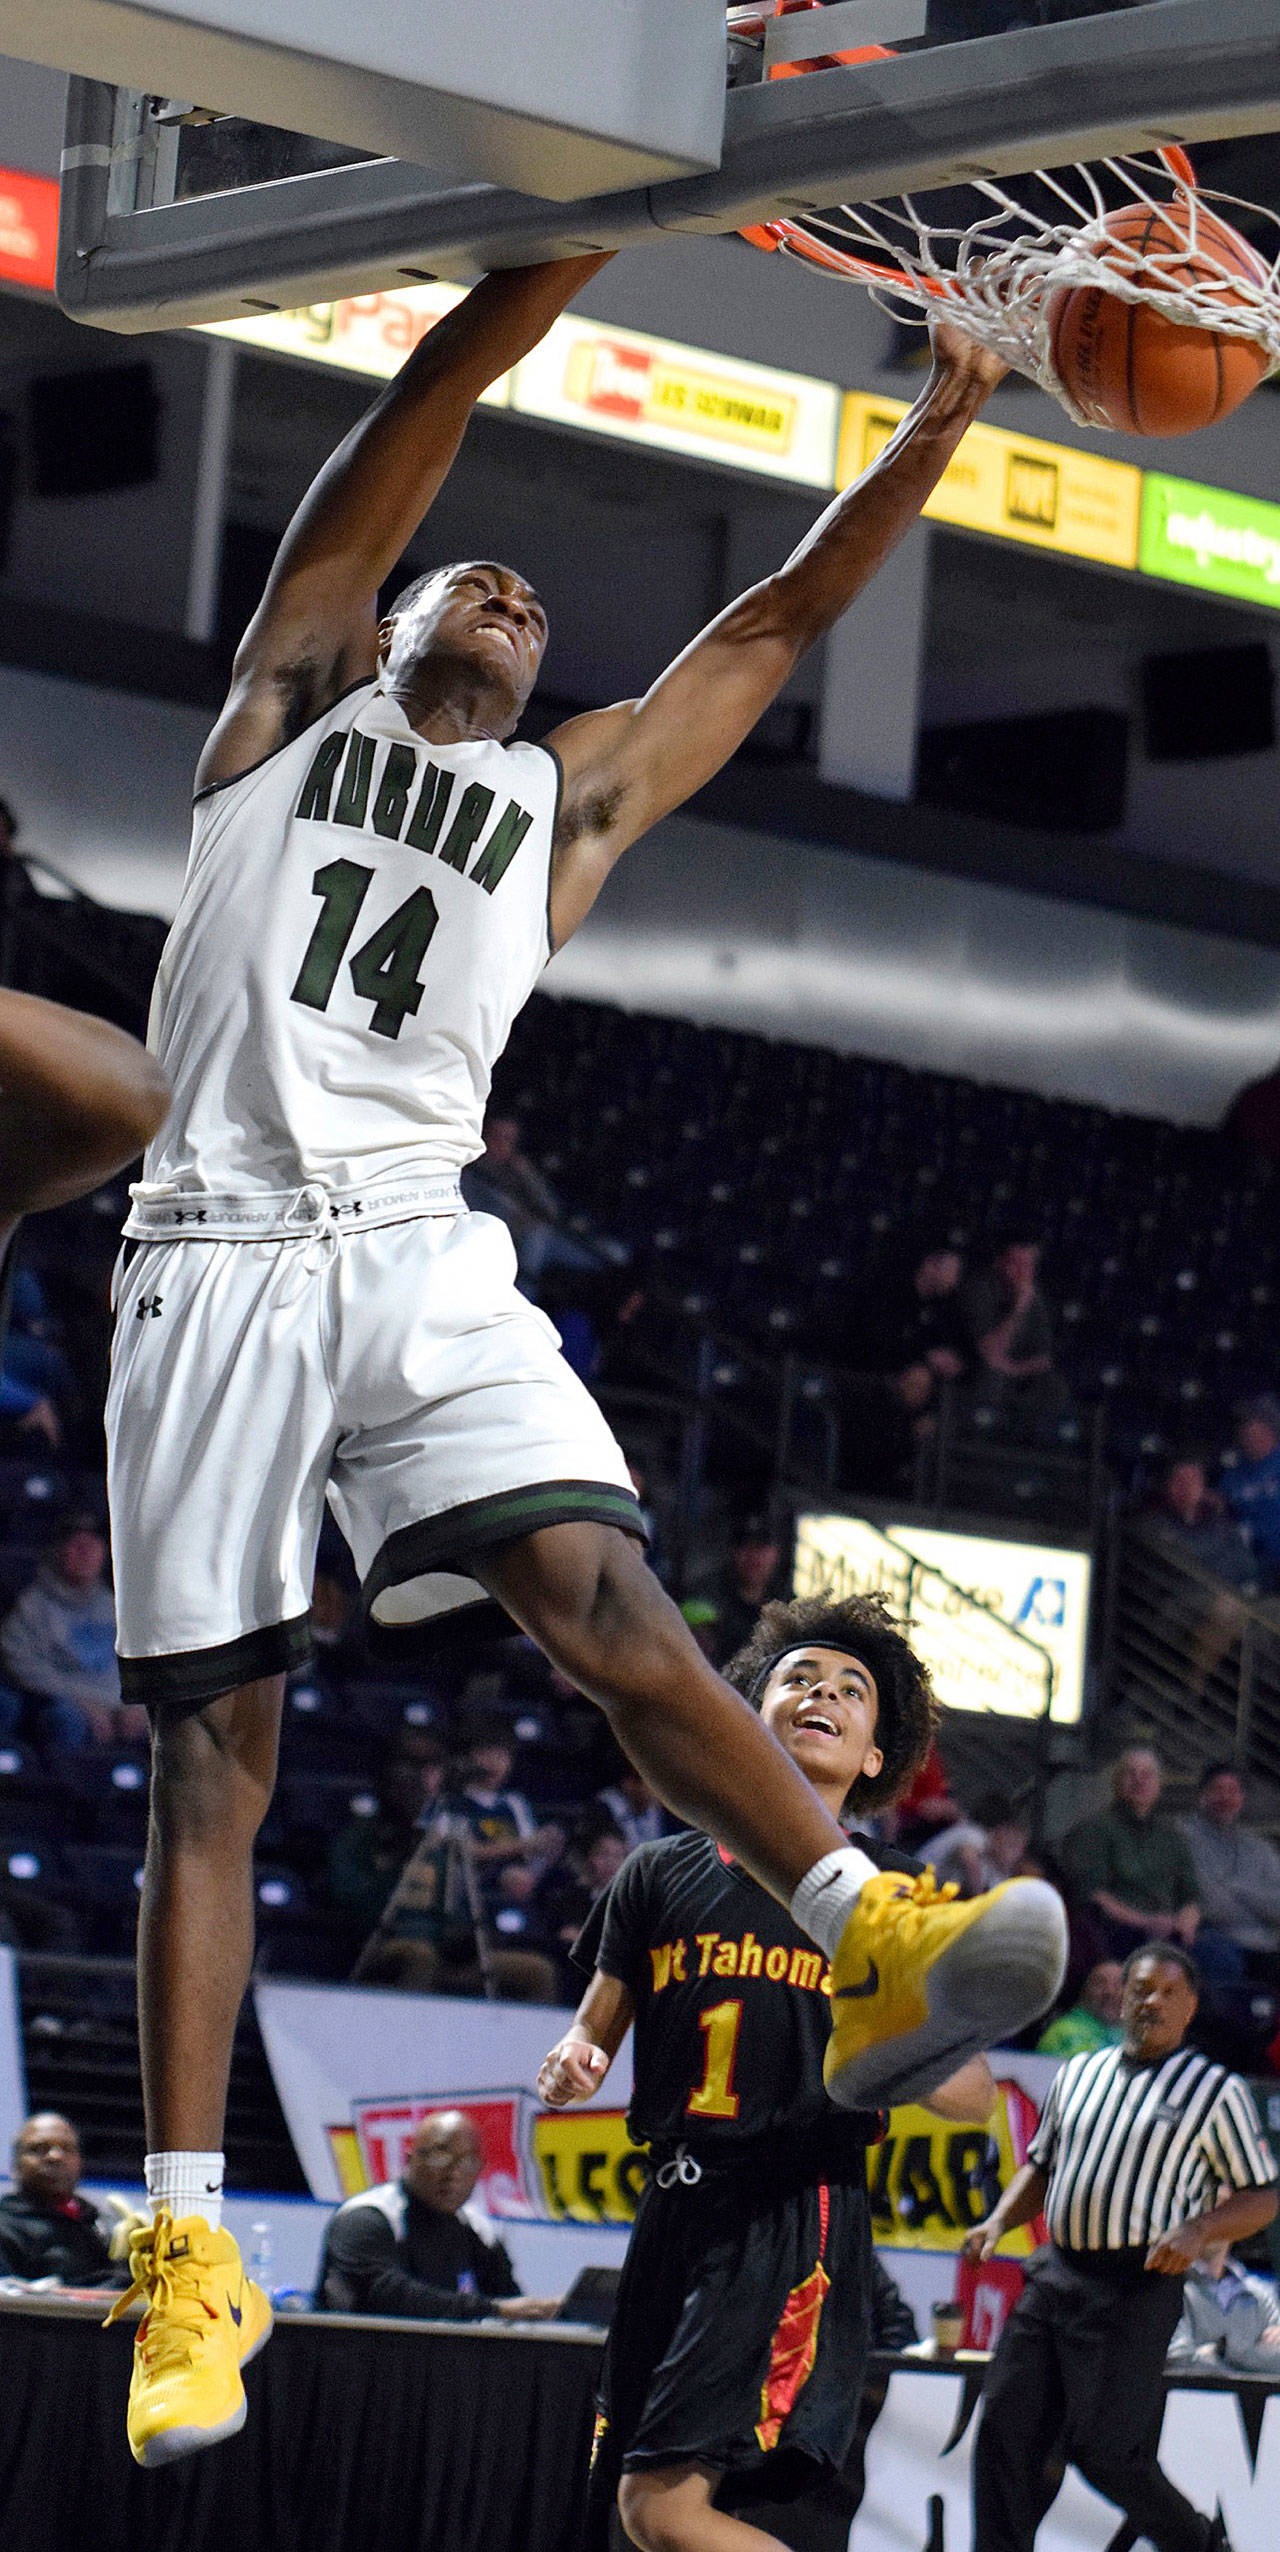 Auburn’s Isaiah Dunn throws down a jam during third-quarter action in the King Showcase at the ShoWare Center on Monday. Dunn finished with 11 points and 10 rebounds in the Trojans’ 80-37 rout of Mount Tahoma. RACHEL CIAMPI, Auburn Reporter